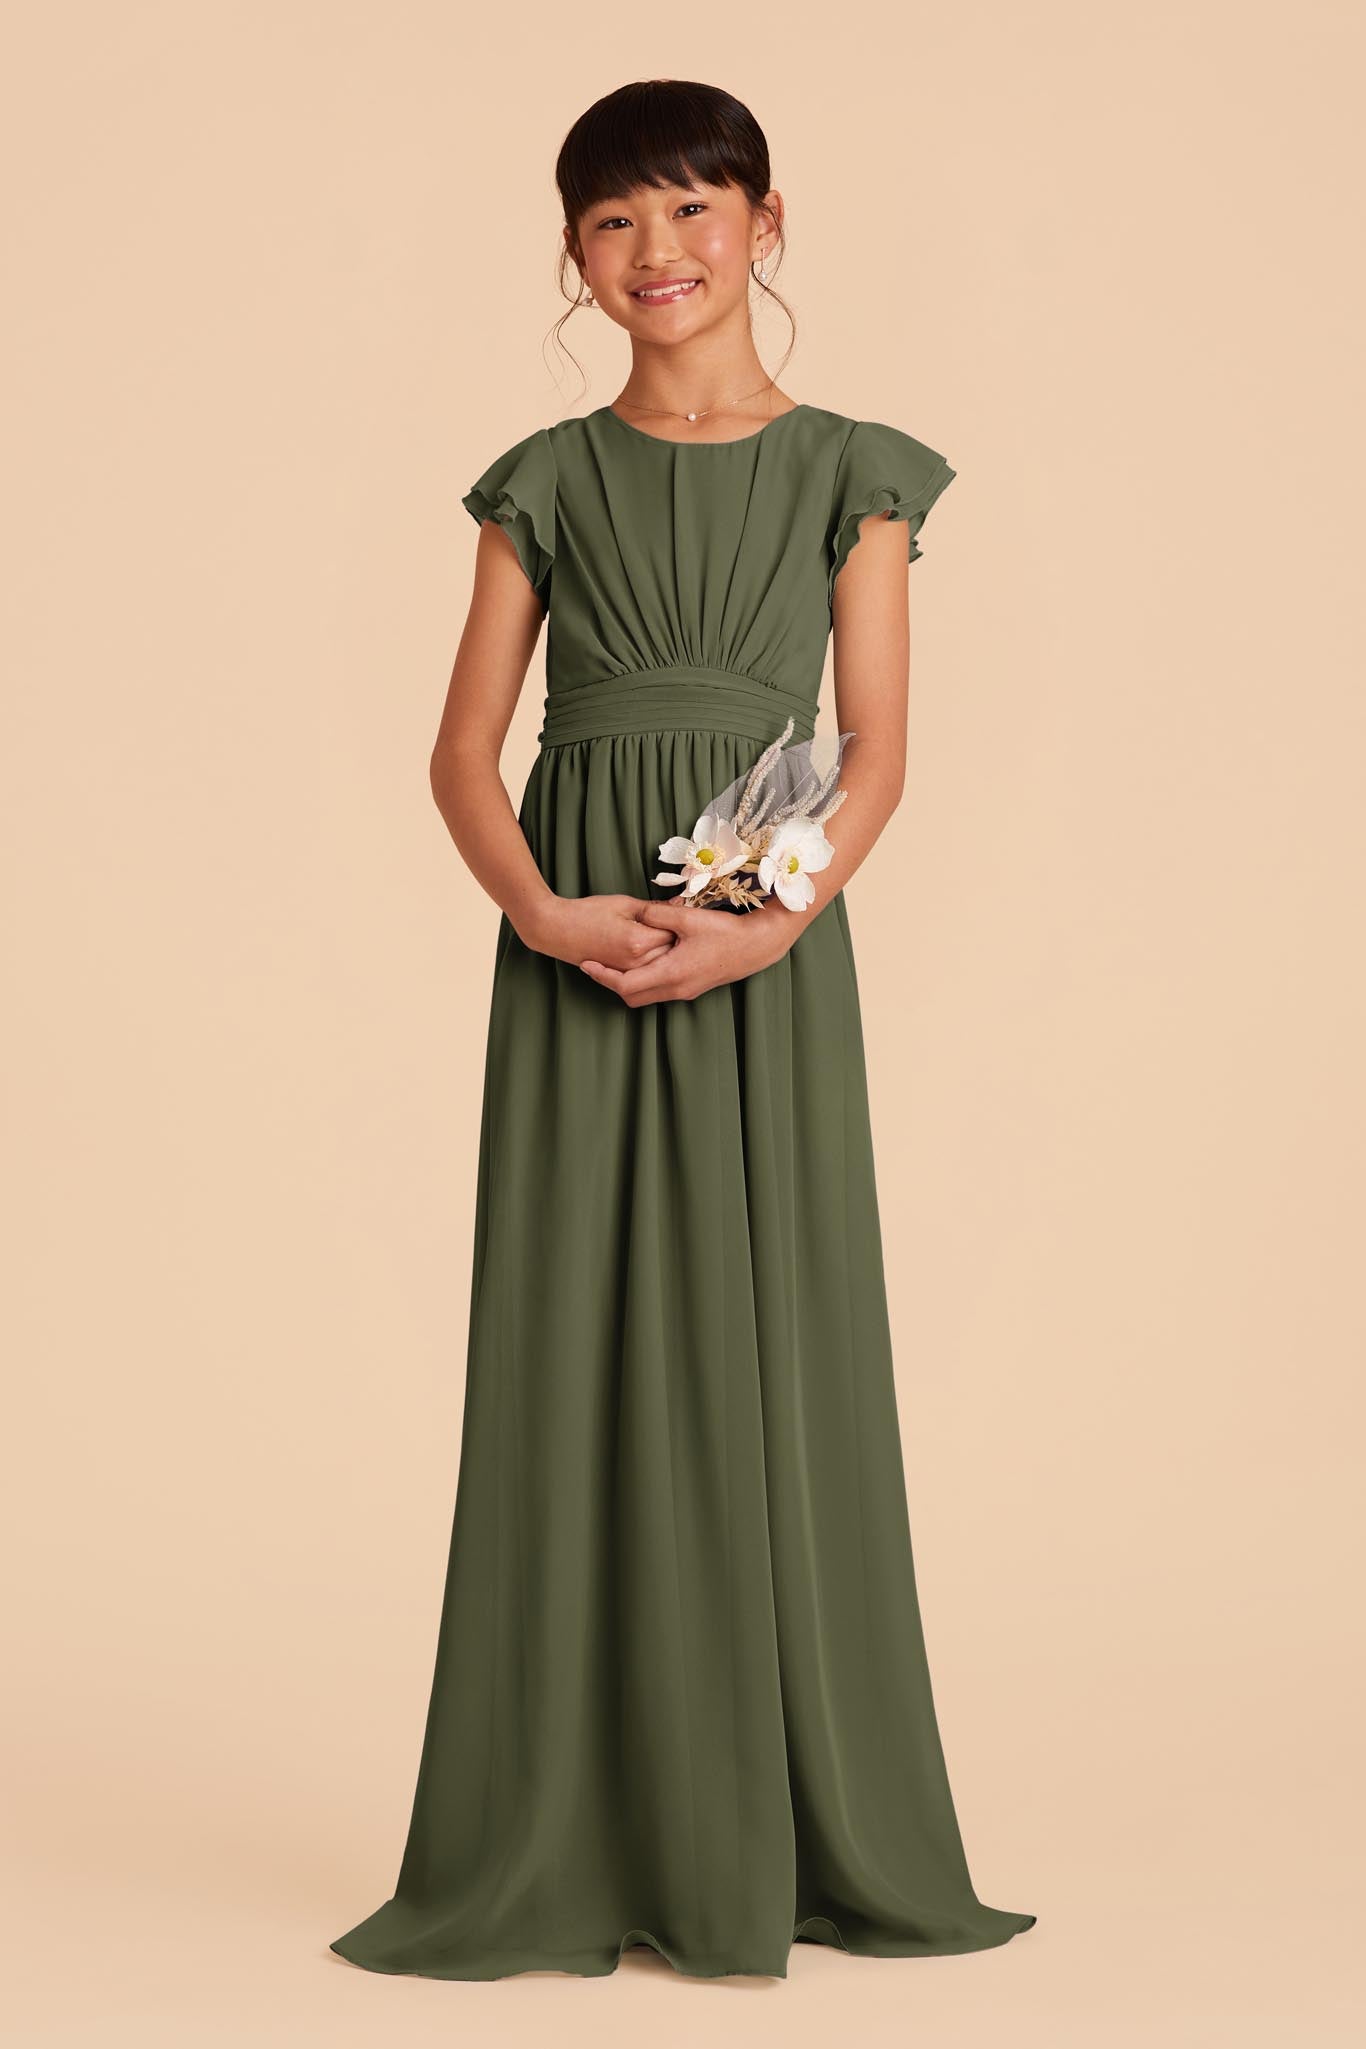 Olive Celine Convertible Junior Dress by Birdy Grey